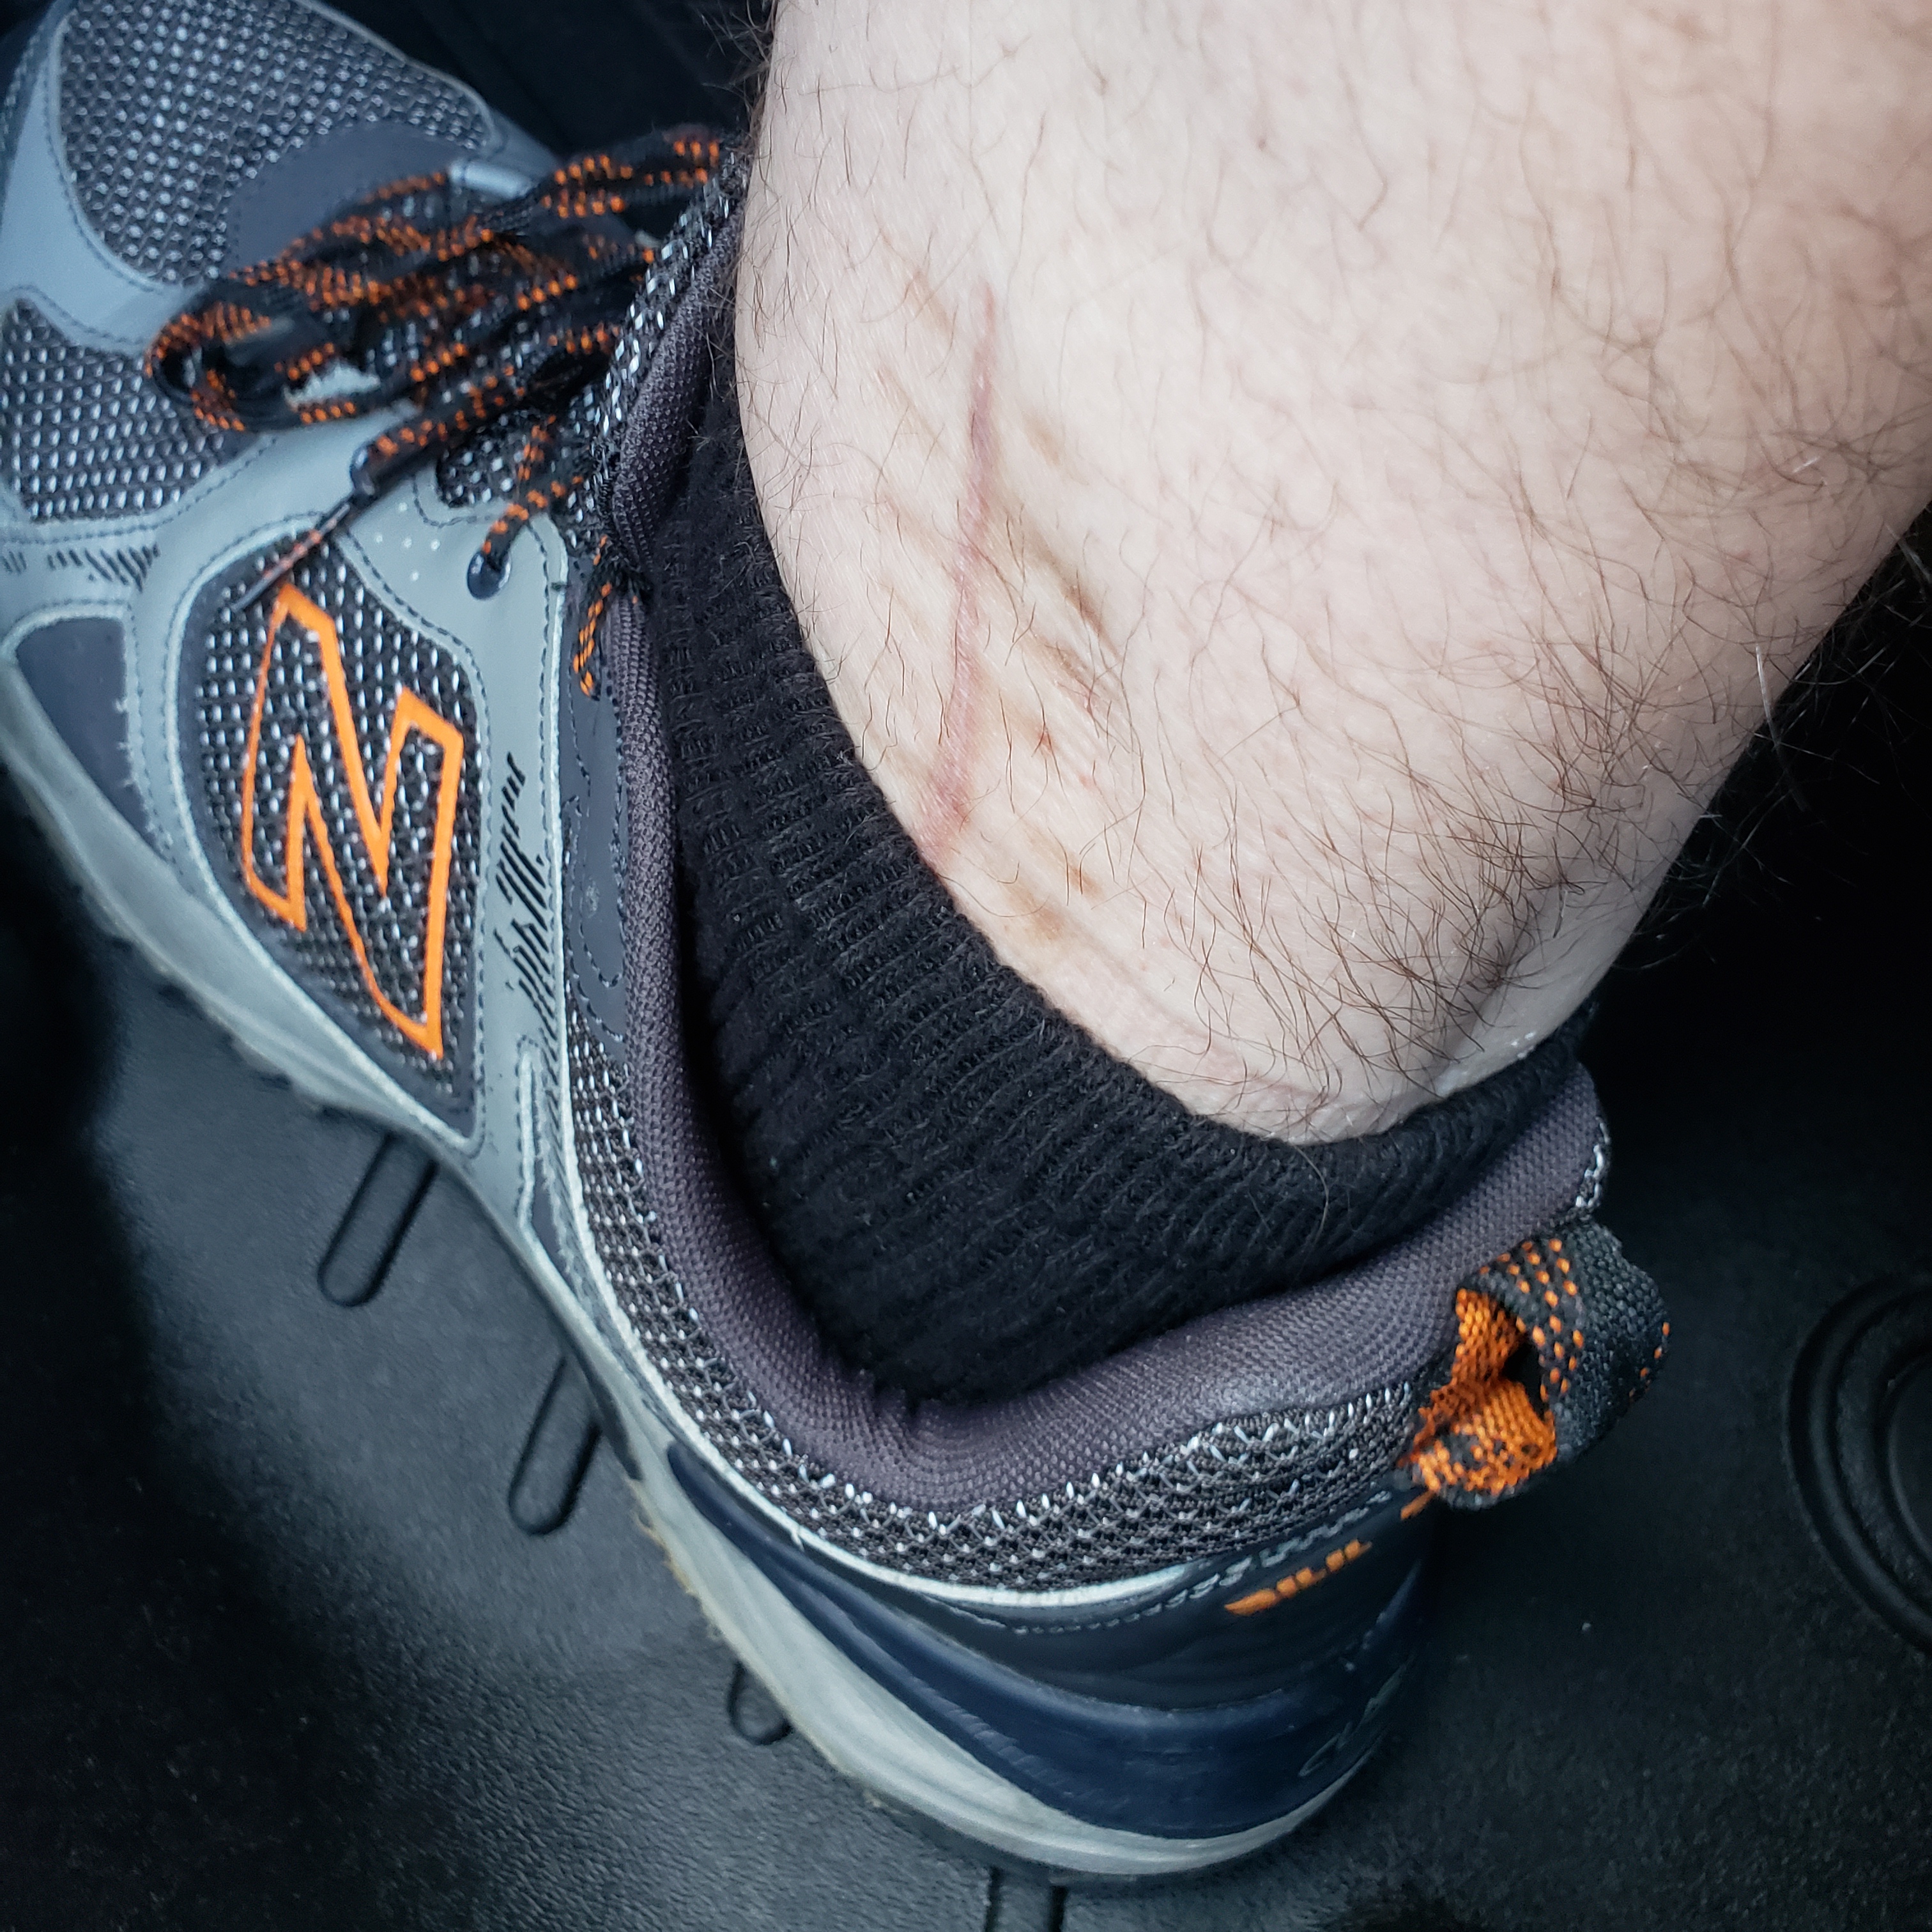 My scar showing above my shoe